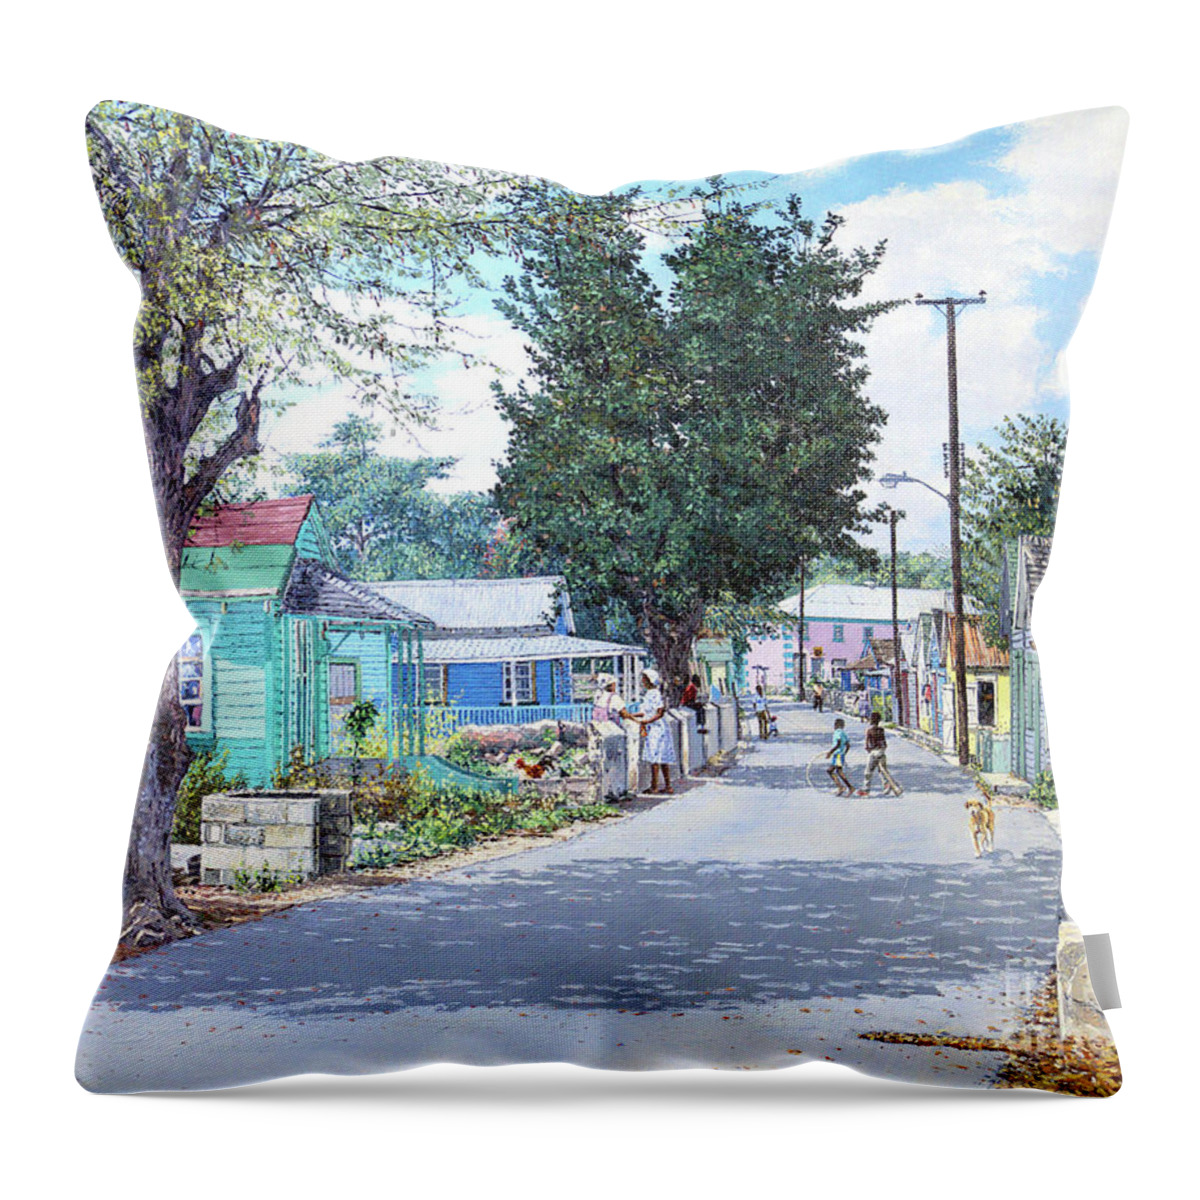  Throw Pillow featuring the painting Mason's Addition by Eddie Minnis